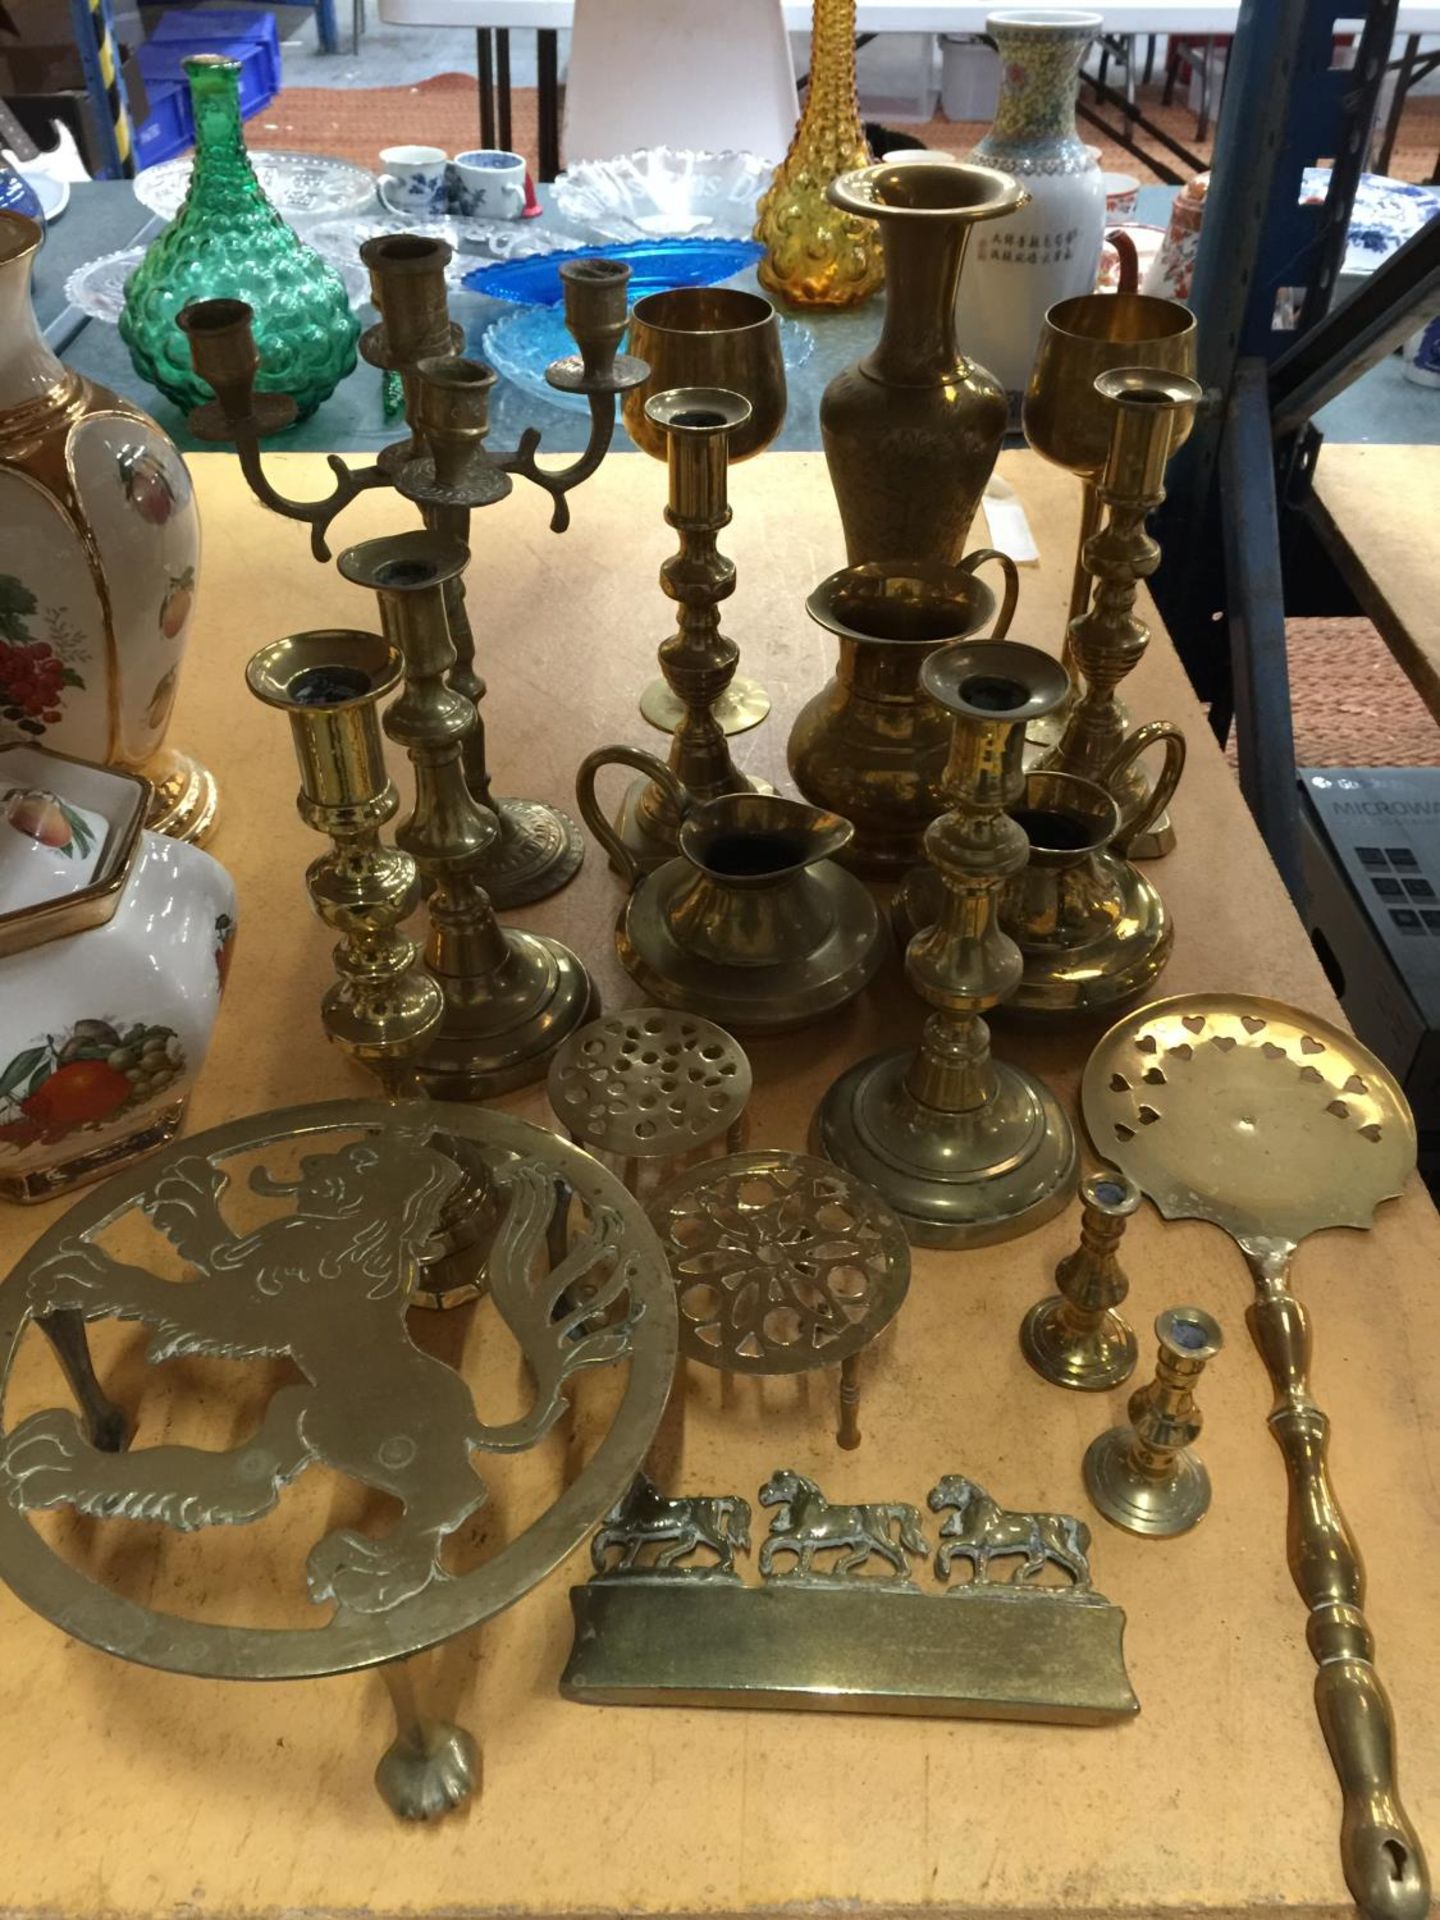 A QUANTITY OF BRASSWARE TO INCLUDE CANDLESTICKS, TRIVETS, GOBLETS, JUGS, VASE, ETC